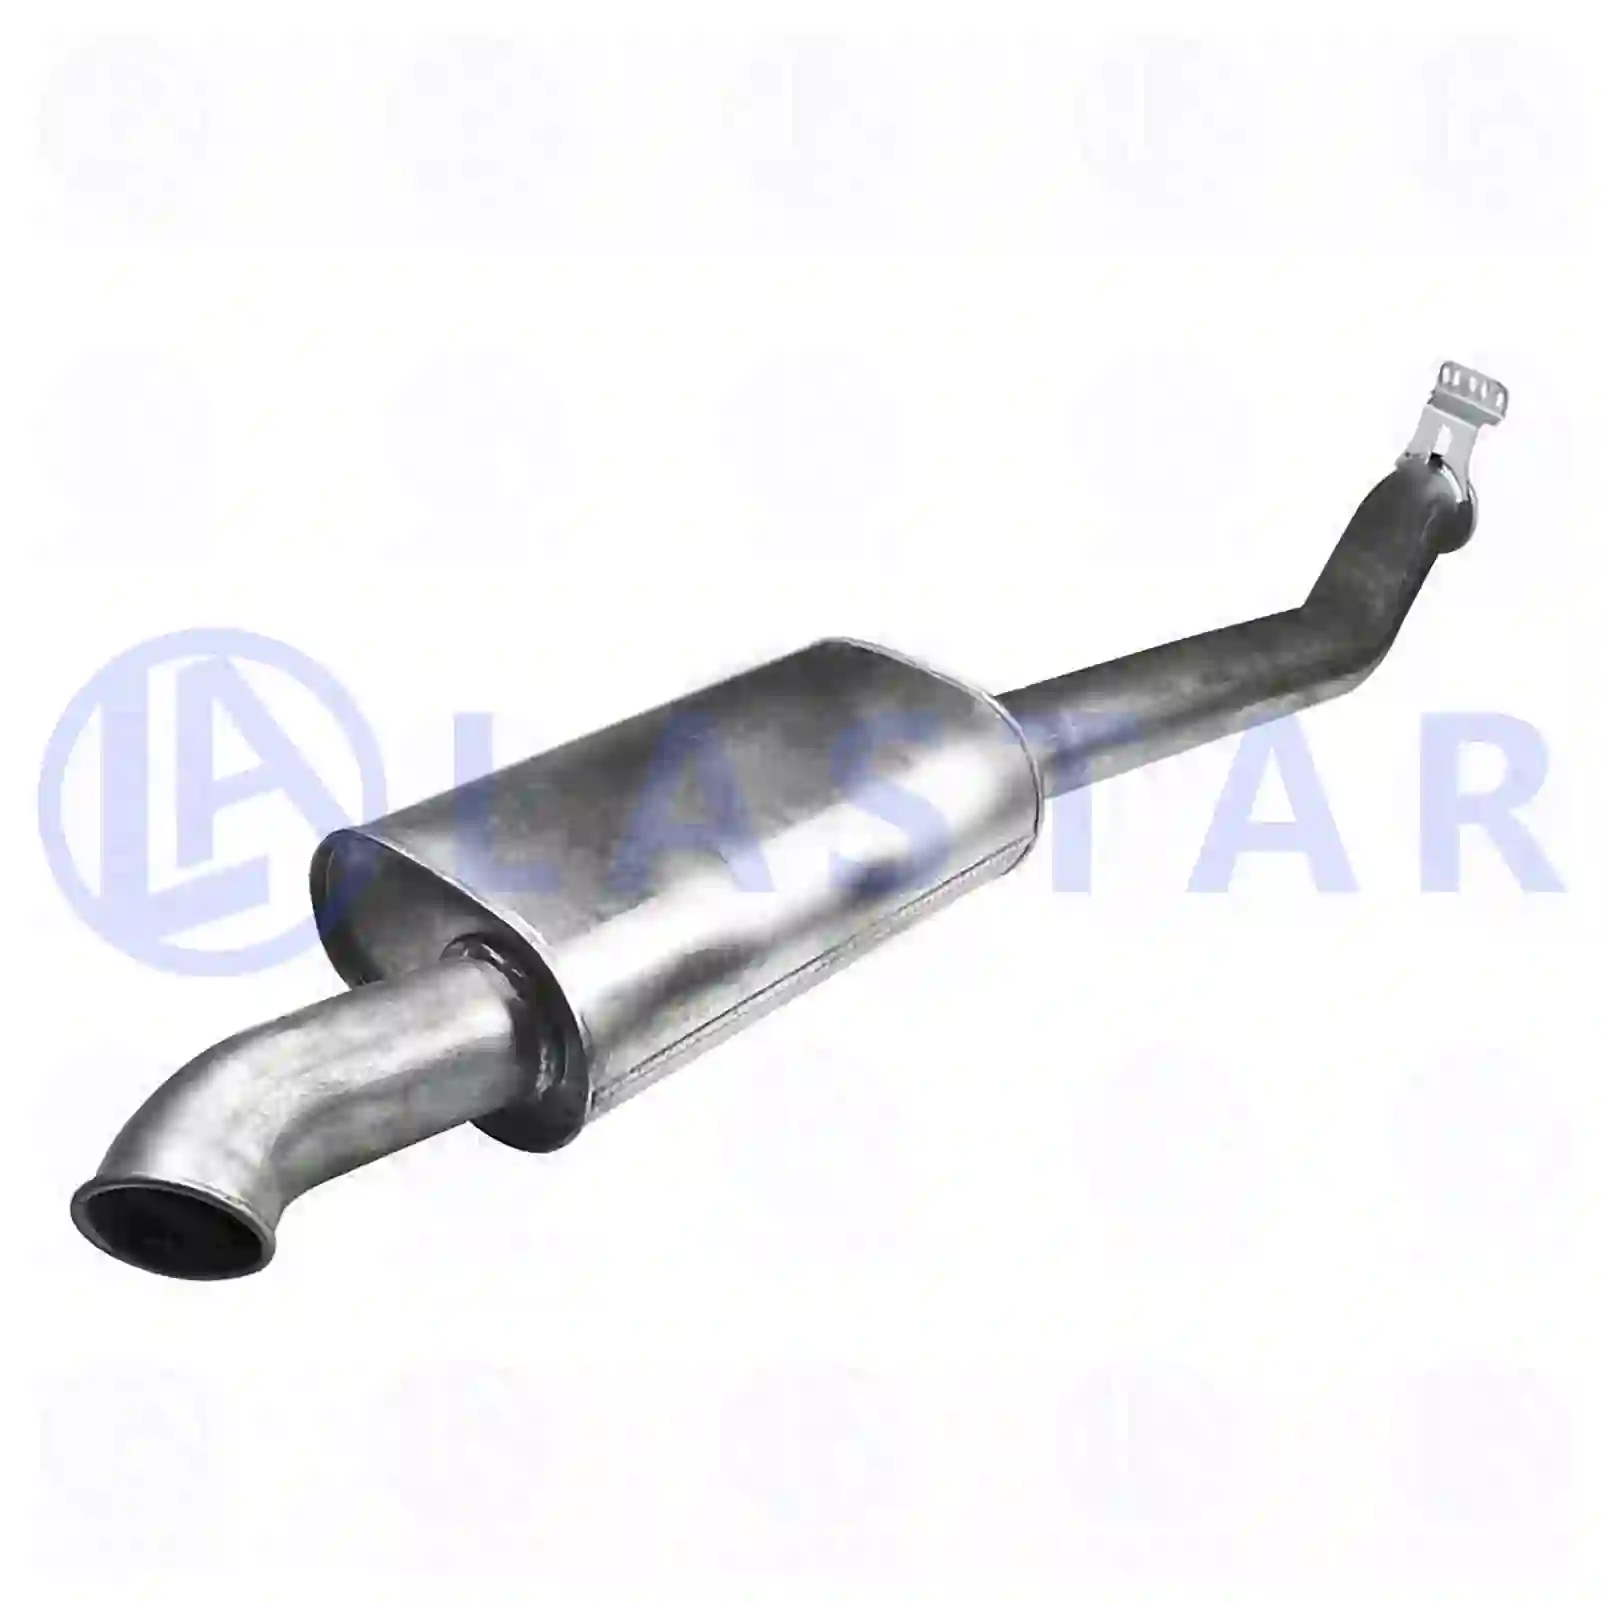 End pipe, 77706681, 1445905, 1445925, 1483281 ||  77706681 Lastar Spare Part | Truck Spare Parts, Auotomotive Spare Parts End pipe, 77706681, 1445905, 1445925, 1483281 ||  77706681 Lastar Spare Part | Truck Spare Parts, Auotomotive Spare Parts